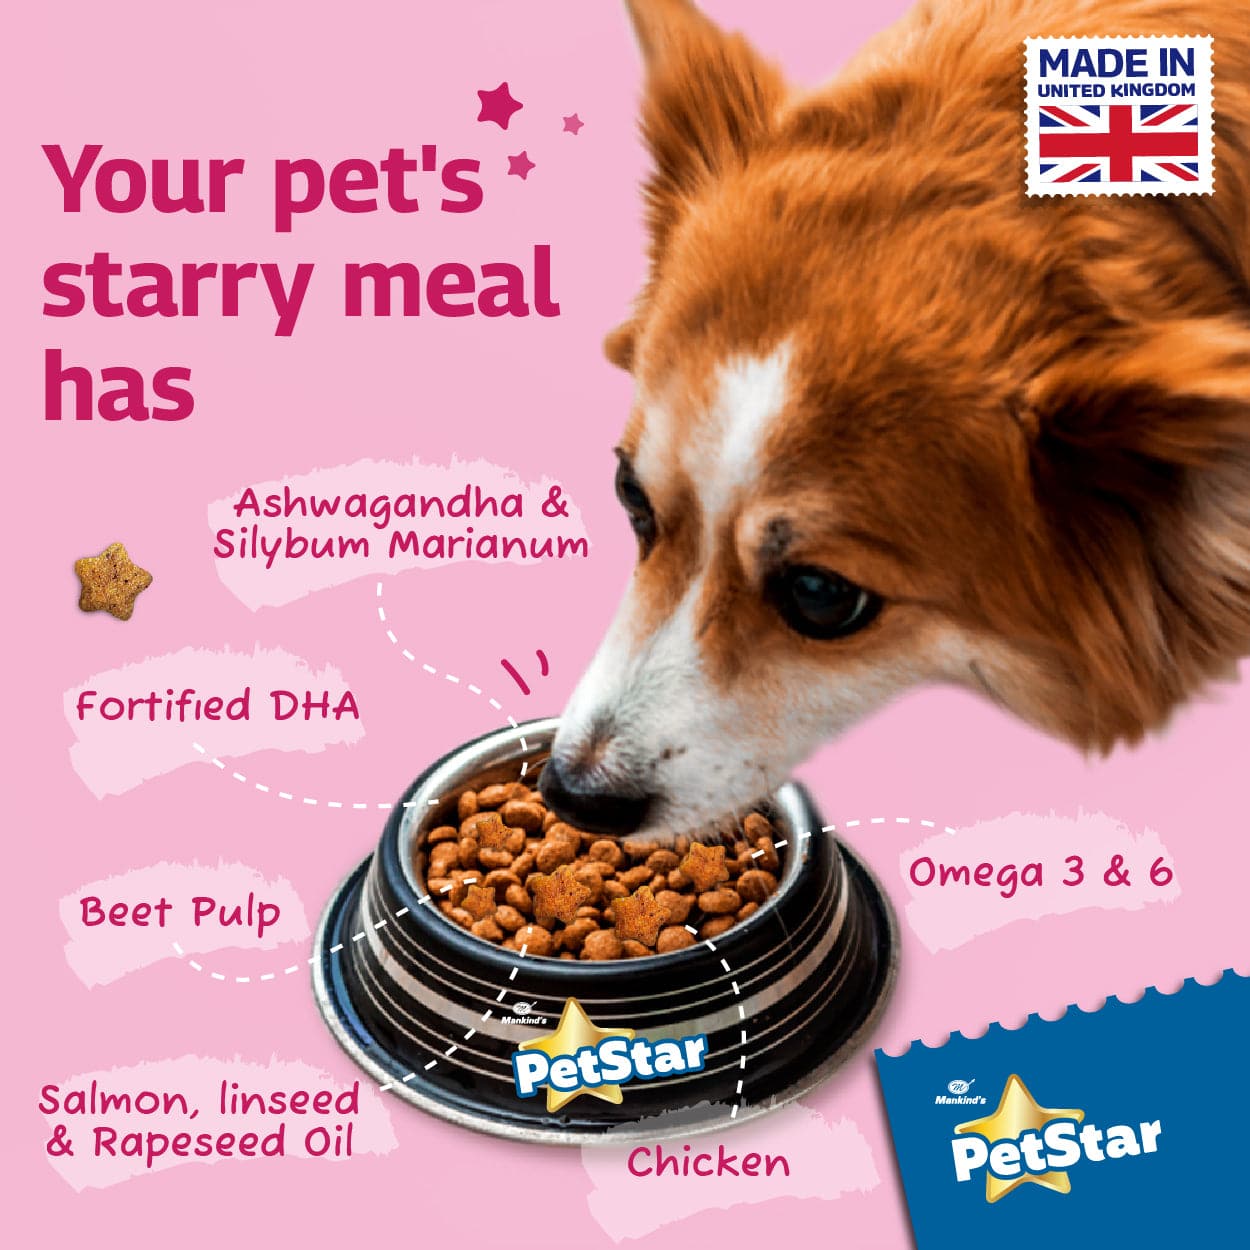 Mankind Petstar Meat and Wheat Dry Food (BOGO) and JerHigh Roasted Duck in Gravy Wet Food for Dogs Combo